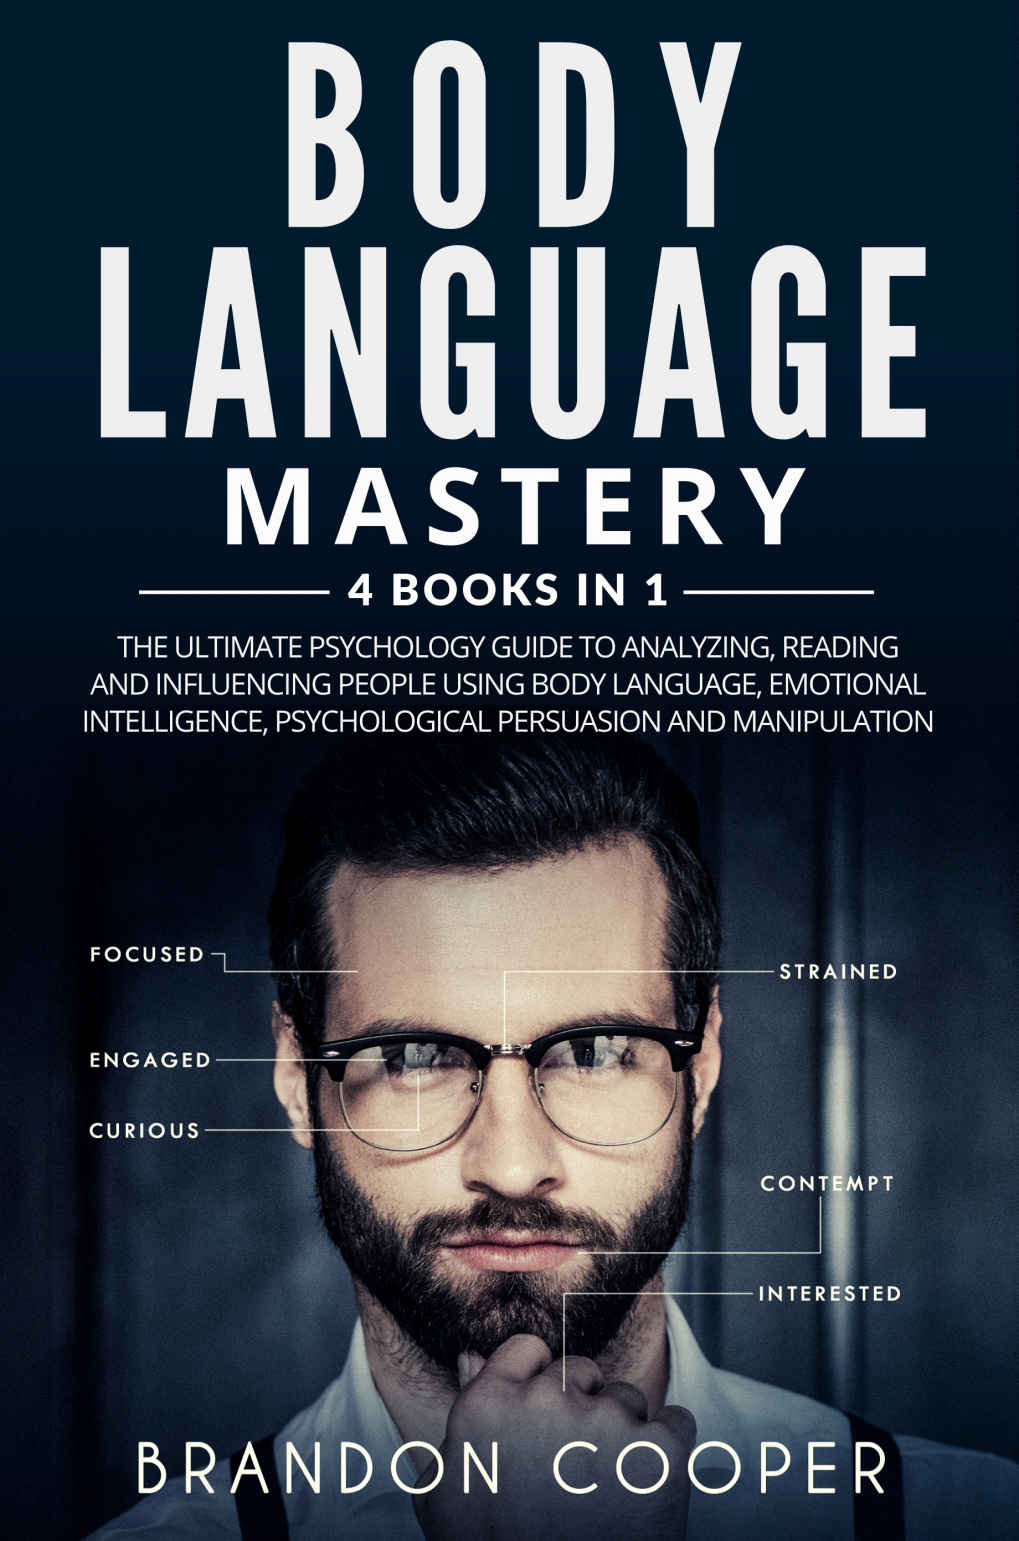 Body Language Mastery: 4 Books in 1: The Ultimate Psychology Guide to Analyzing, Reading and Influencing People using Body Language, Emotional Intelligence, Psychological Persuasion and Manipulation